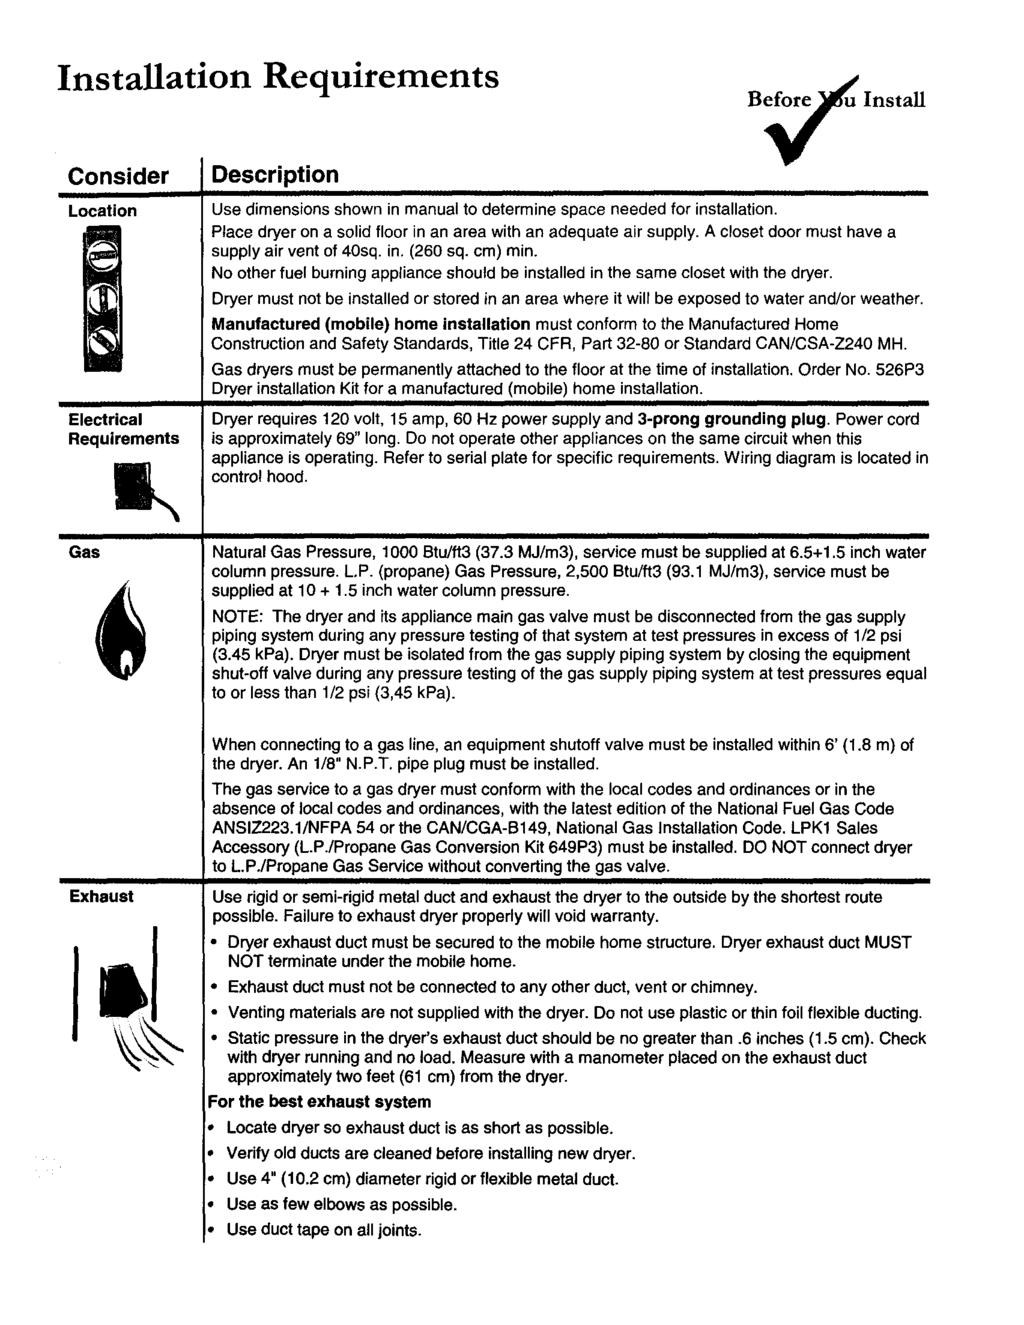 nstallation Requirements B_X_ nstall Consider Location Electrical Requirements Description Use dimensions shown in manual to determine space needed for installation.